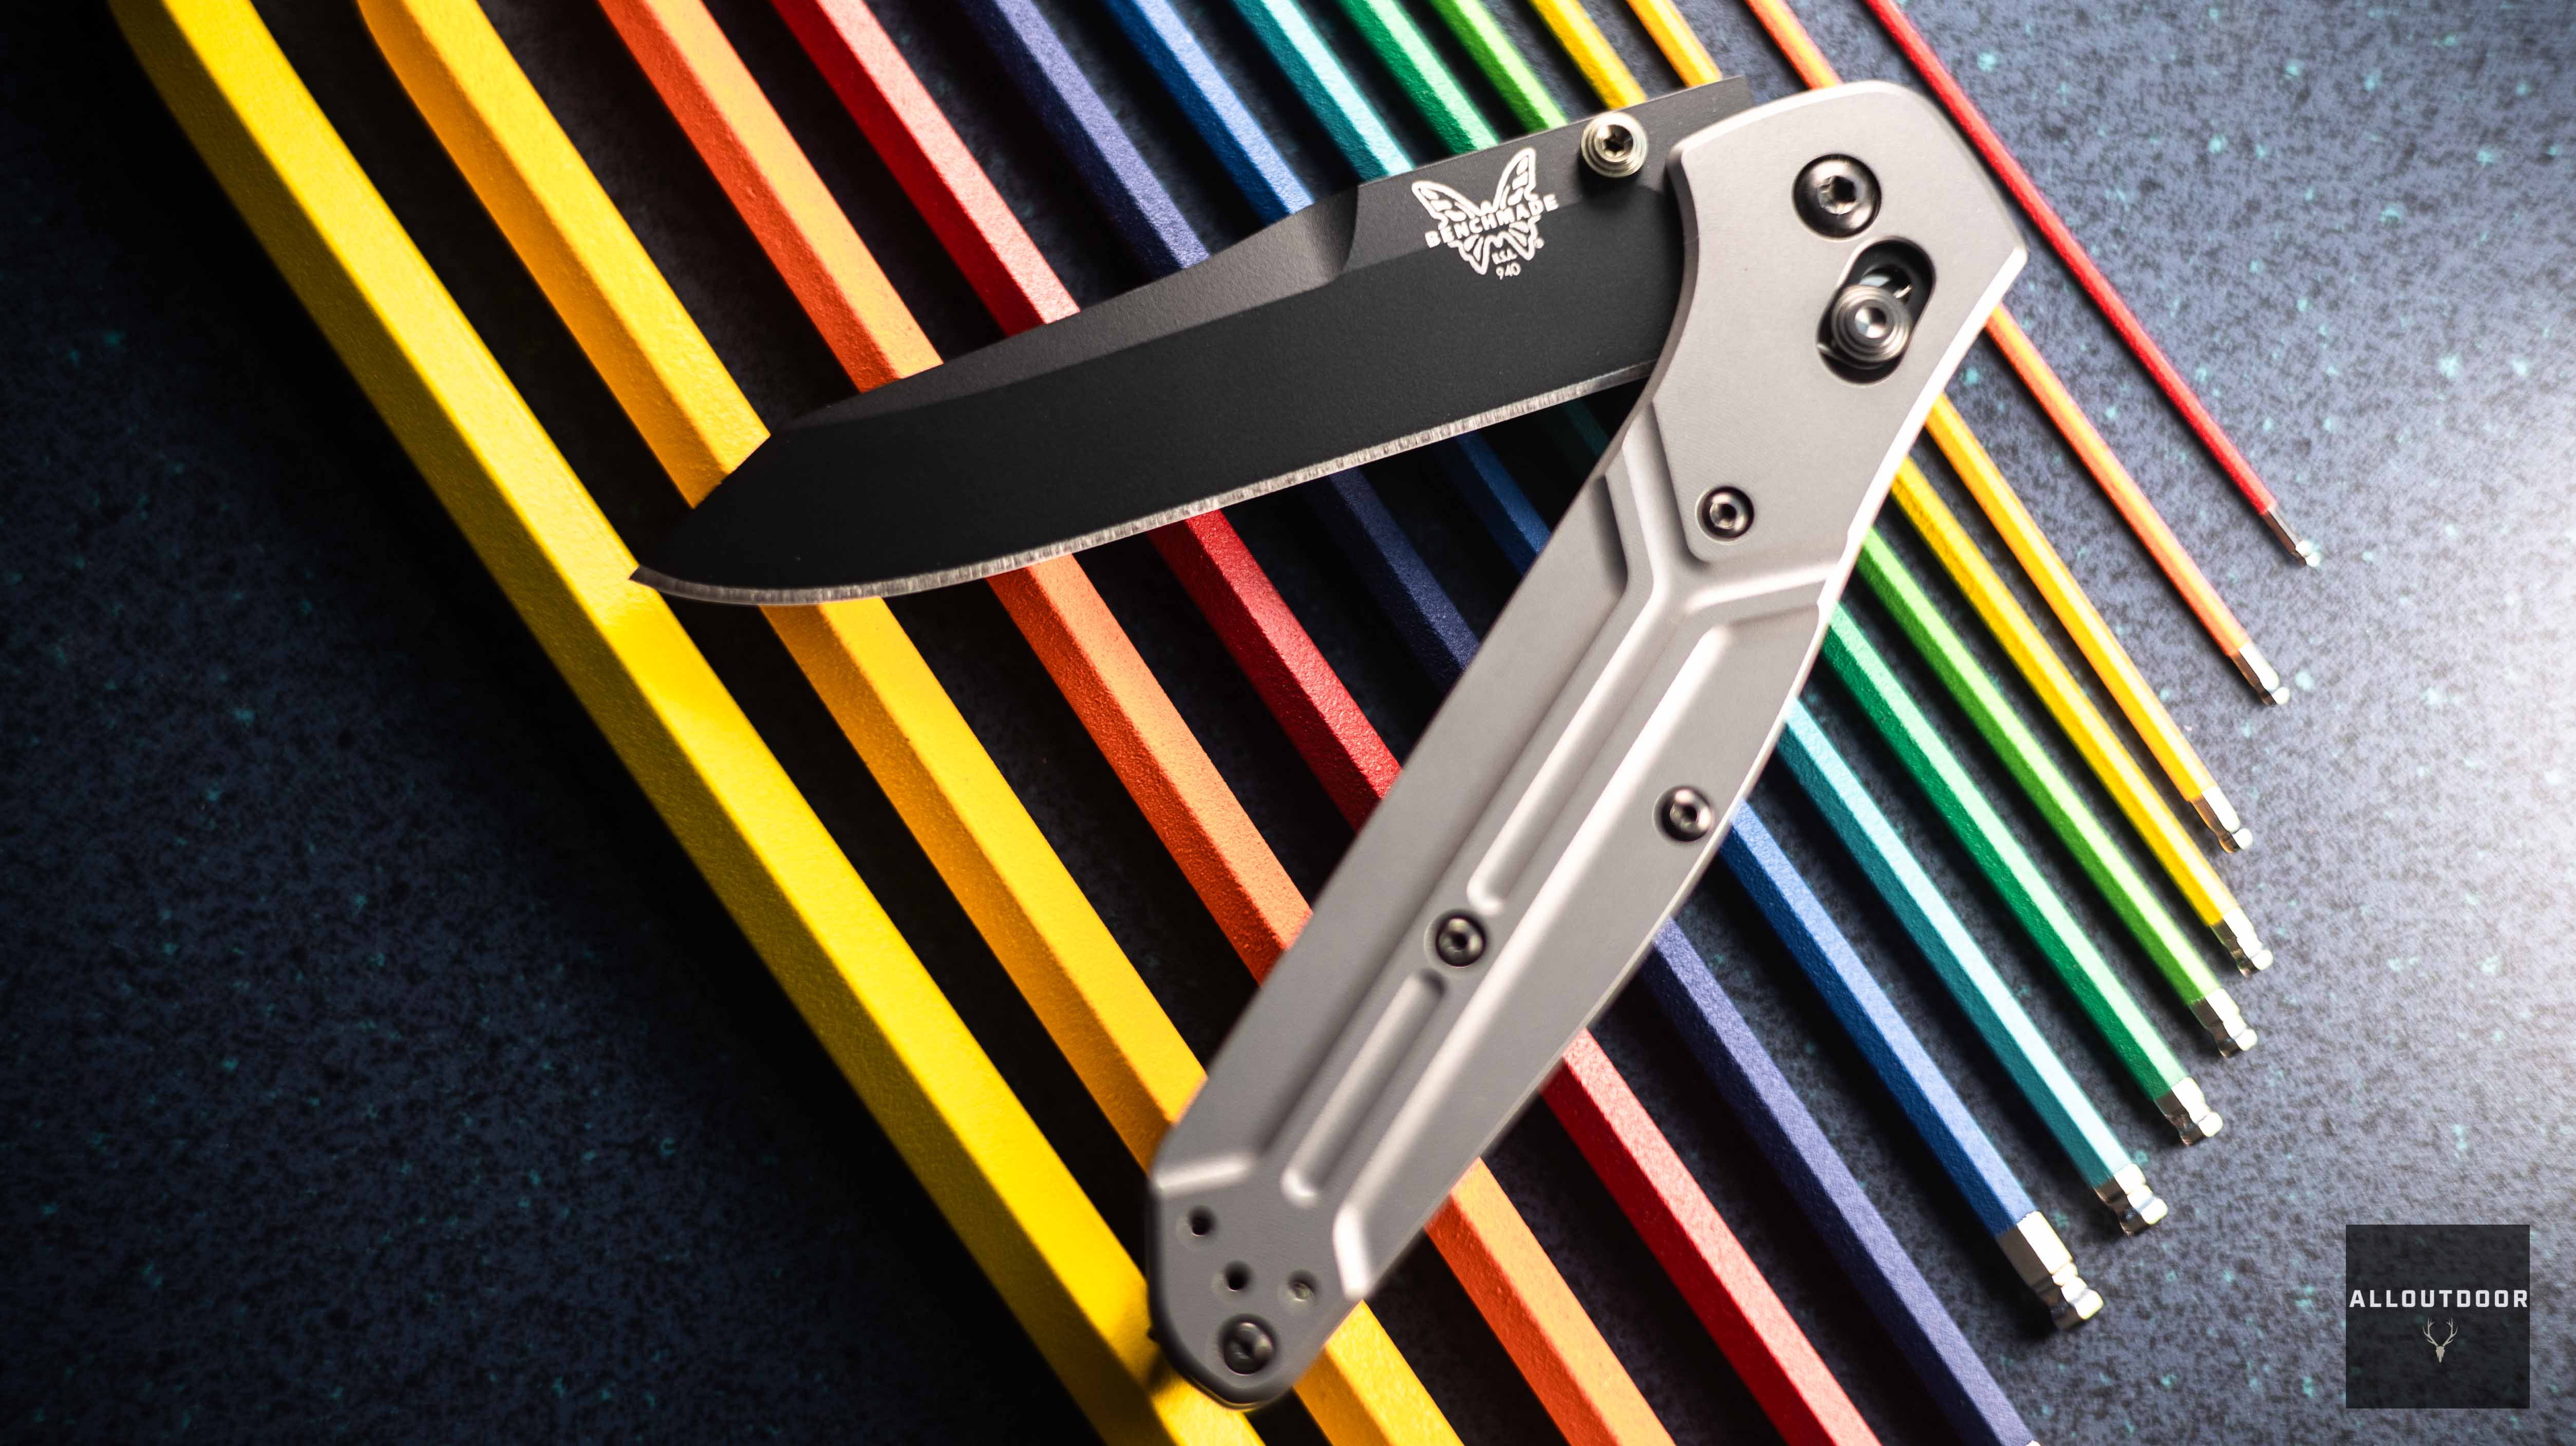 Benchmade Custom 940 - Crafting your Very Own, One-of-a-Kind Knife